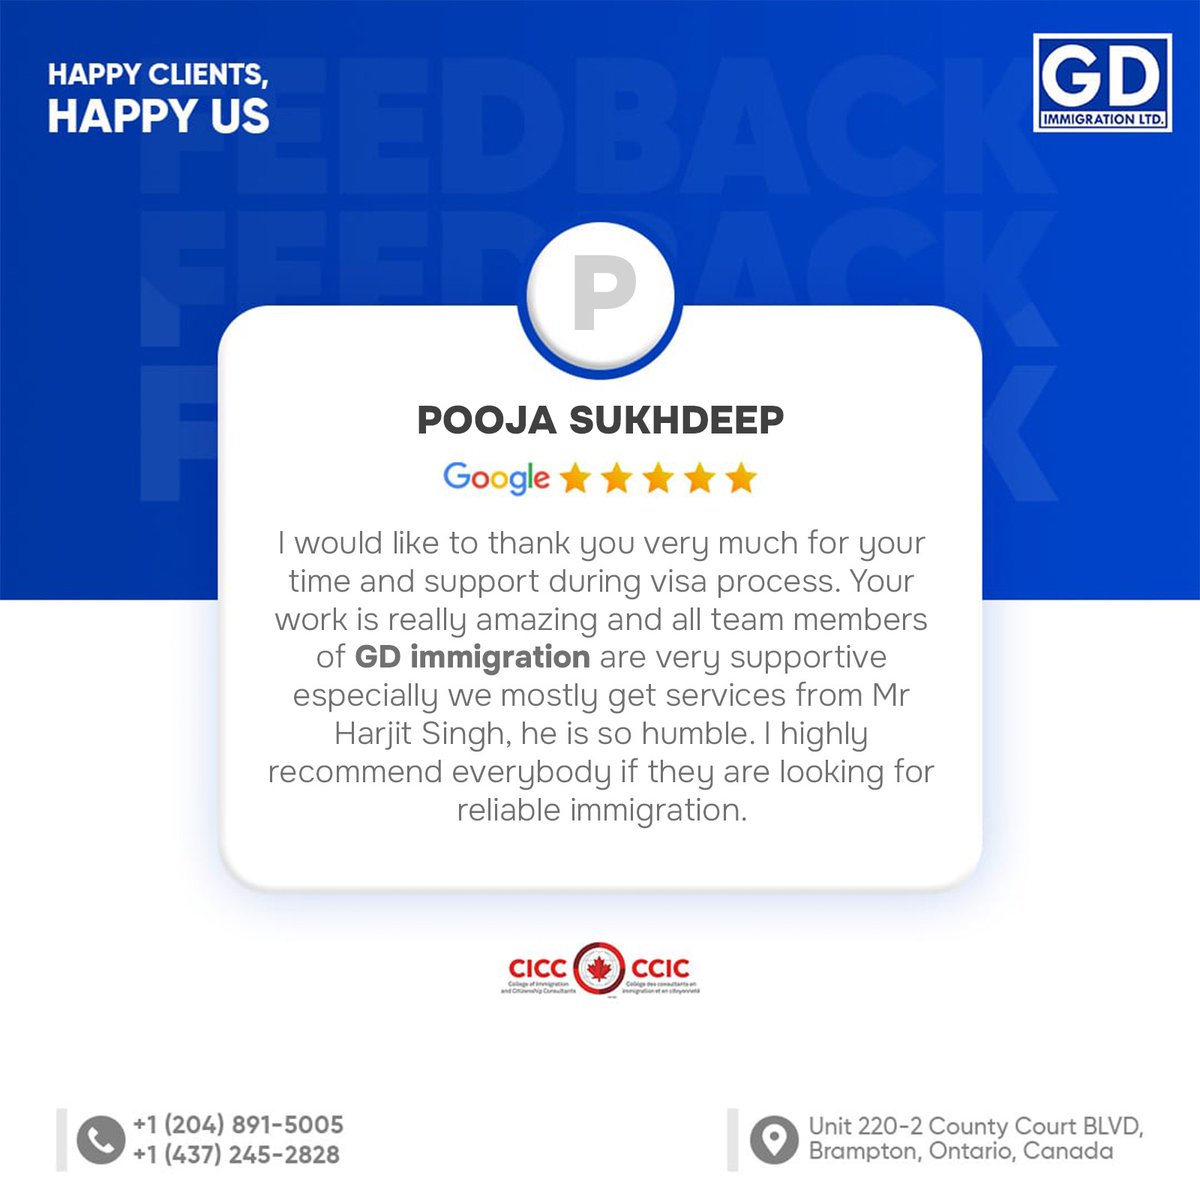 🚀 Gratitude fills our hearts as Pooja Sukhdeep shares her positive experience with GD Immigration! 🌟

#GDImmigration #Canada #GoogleReview #CanadaSuperVisa #Visa #exploreCanada #VisaApproval #ImmigrationConsultants #brampton #SuccessStory #Immigration #visa #punjab #india